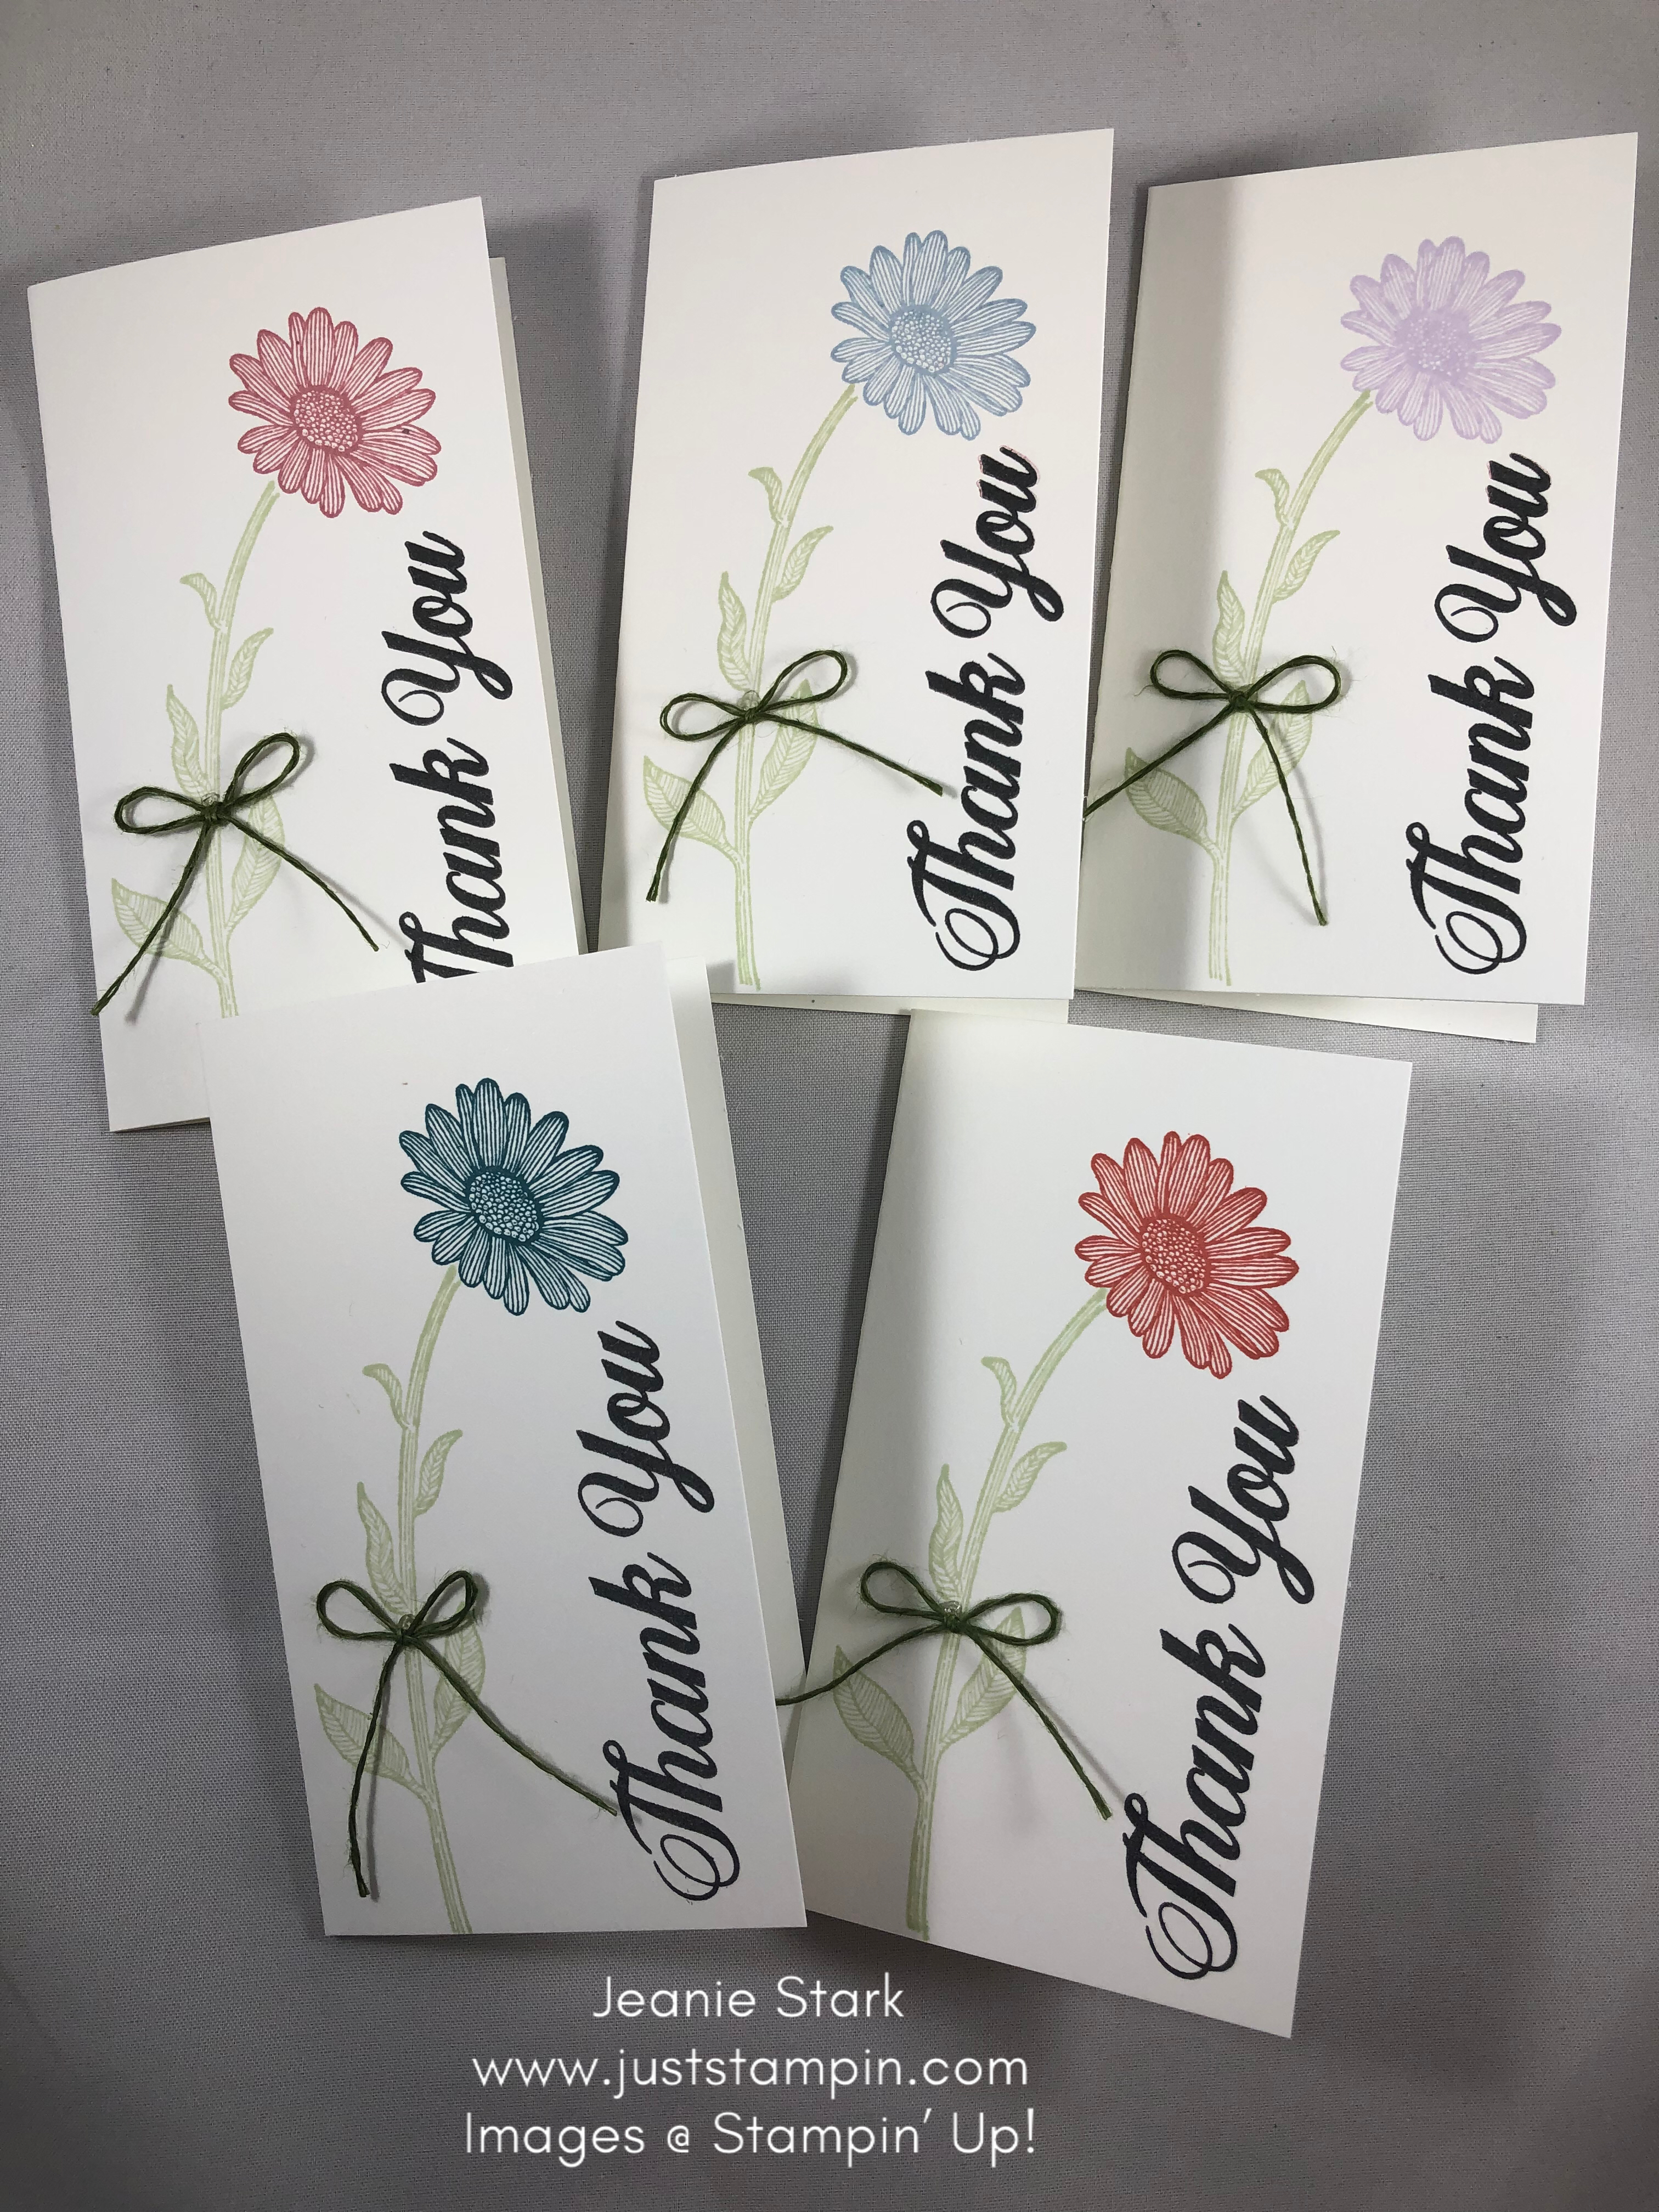 Stampin' Up! Daisy Lane In Color thank you note card idea - Jeanie Stark StampinUp